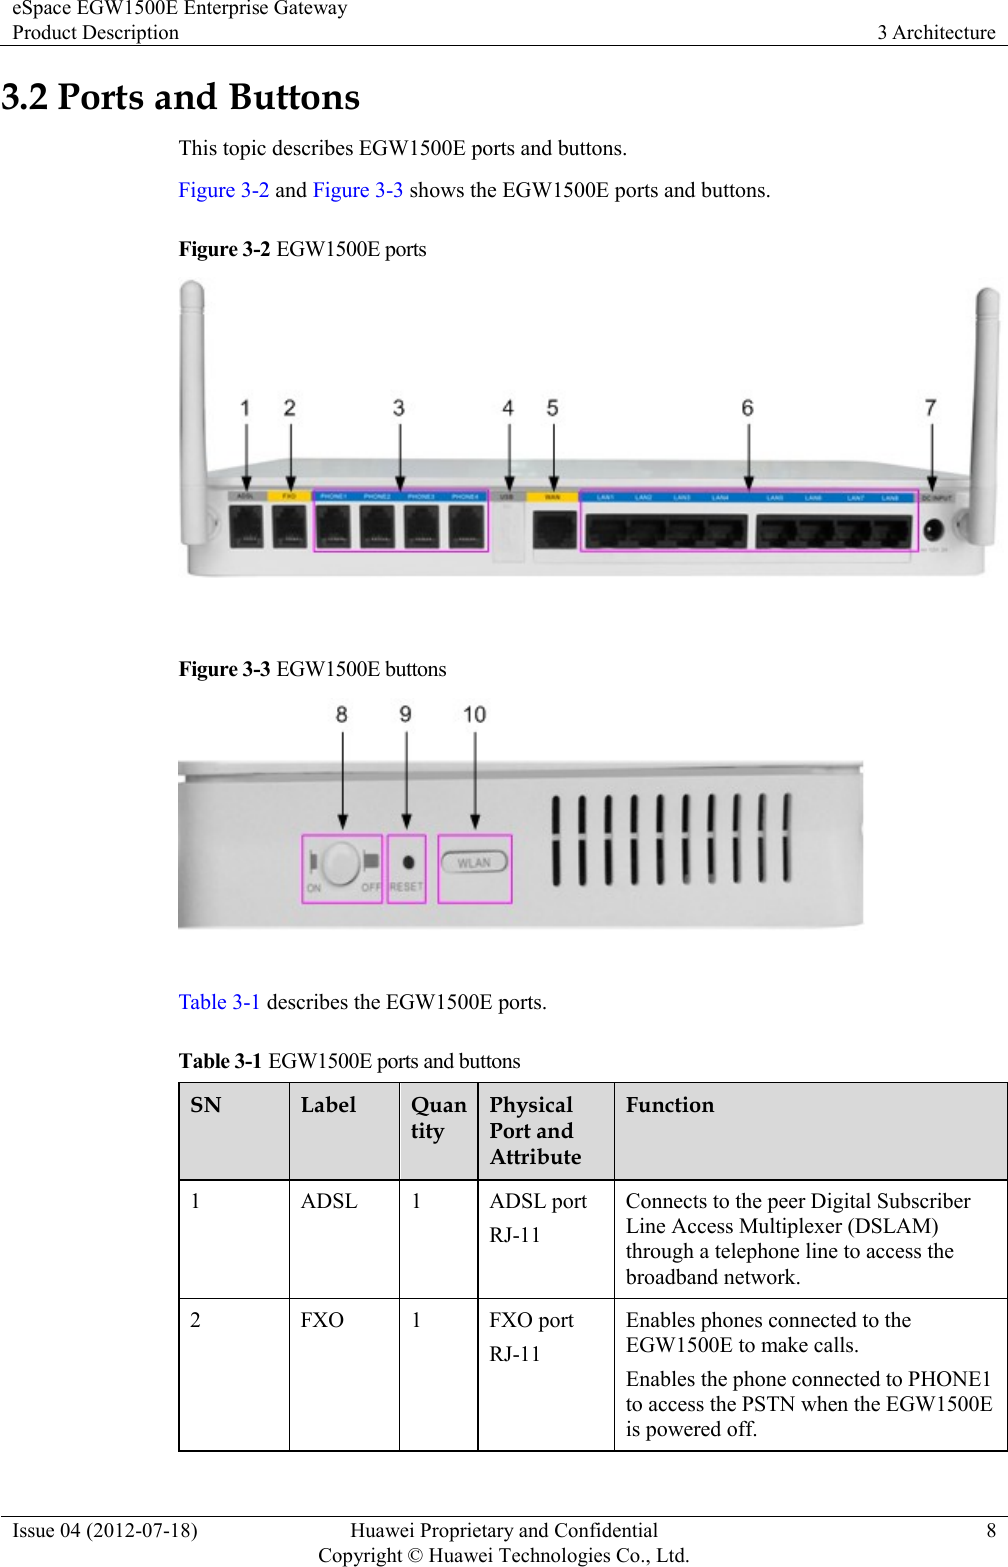 eSpace EGW1500E Enterprise Gateway Product Description 3 Architecture  Issue 04 (2012-07-18) Huawei Proprietary and Confidential                                     Copyright © Huawei Technologies Co., Ltd. 8  3.2 Ports and Buttons This topic describes EGW1500E ports and buttons. Figure 3-2 and Figure 3-3 shows the EGW1500E ports and buttons. Figure 3-2 EGW1500E ports   Figure 3-3 EGW1500E buttons   Table 3-1 describes the EGW1500E ports. Table 3-1 EGW1500E ports and buttons SN Label Quantity Physical Port and Attribute Function 1 ADSL 1 ADSL port RJ-11 Connects to the peer Digital Subscriber Line Access Multiplexer (DSLAM) through a telephone line to access the broadband network. 2 FXO 1 FXO port RJ-11 Enables phones connected to the EGW1500E to make calls. Enables the phone connected to PHONE1 to access the PSTN when the EGW1500E is powered off. 